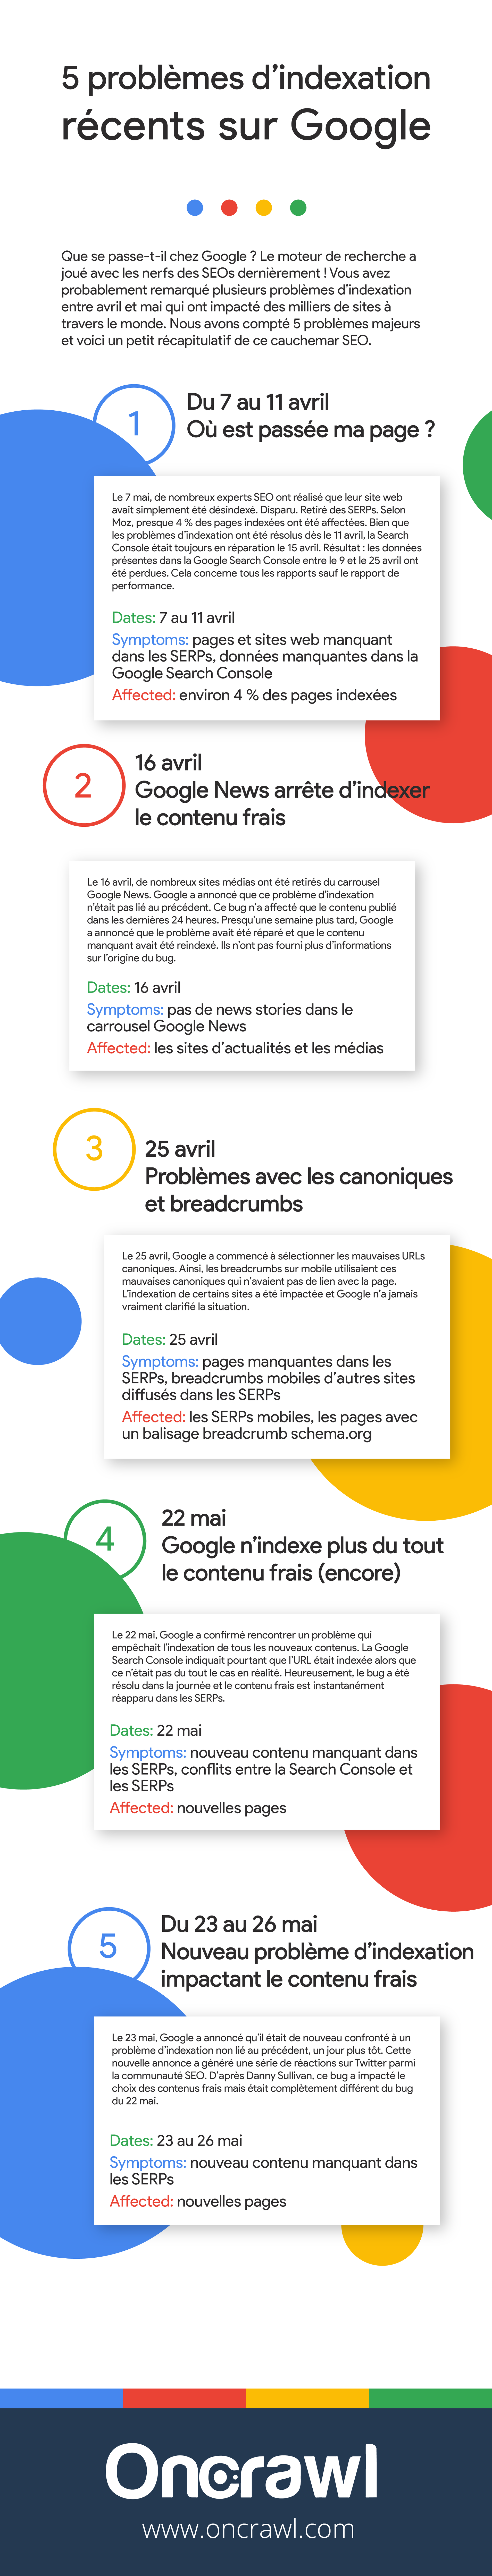 5-problemes-indexation-recents-google